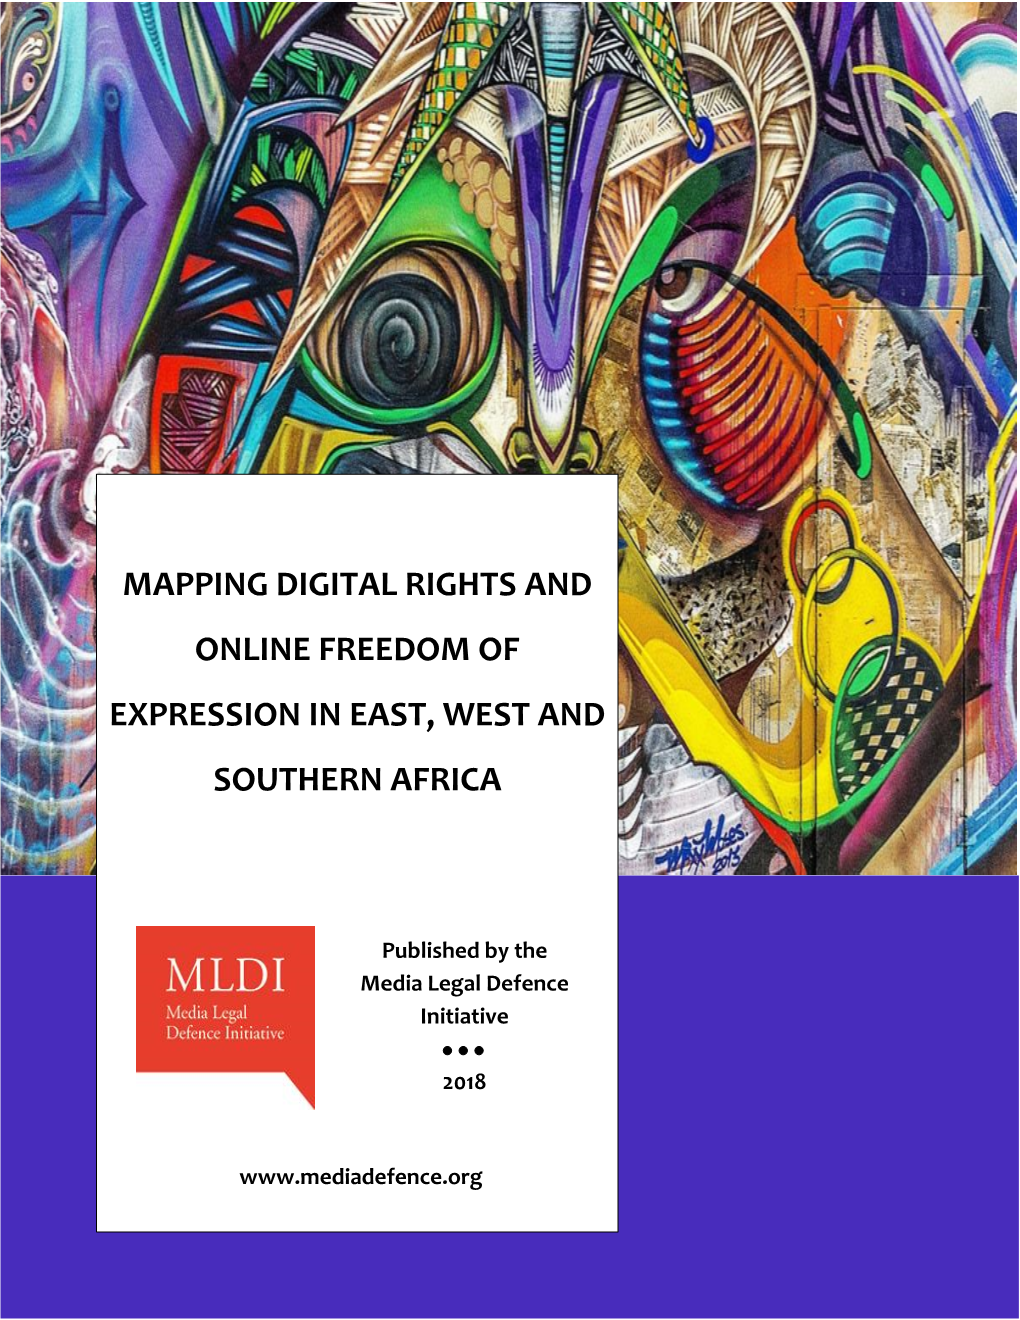 Mapping Digital Rights and Online Freedom of Expression in East, West and Southern Africa